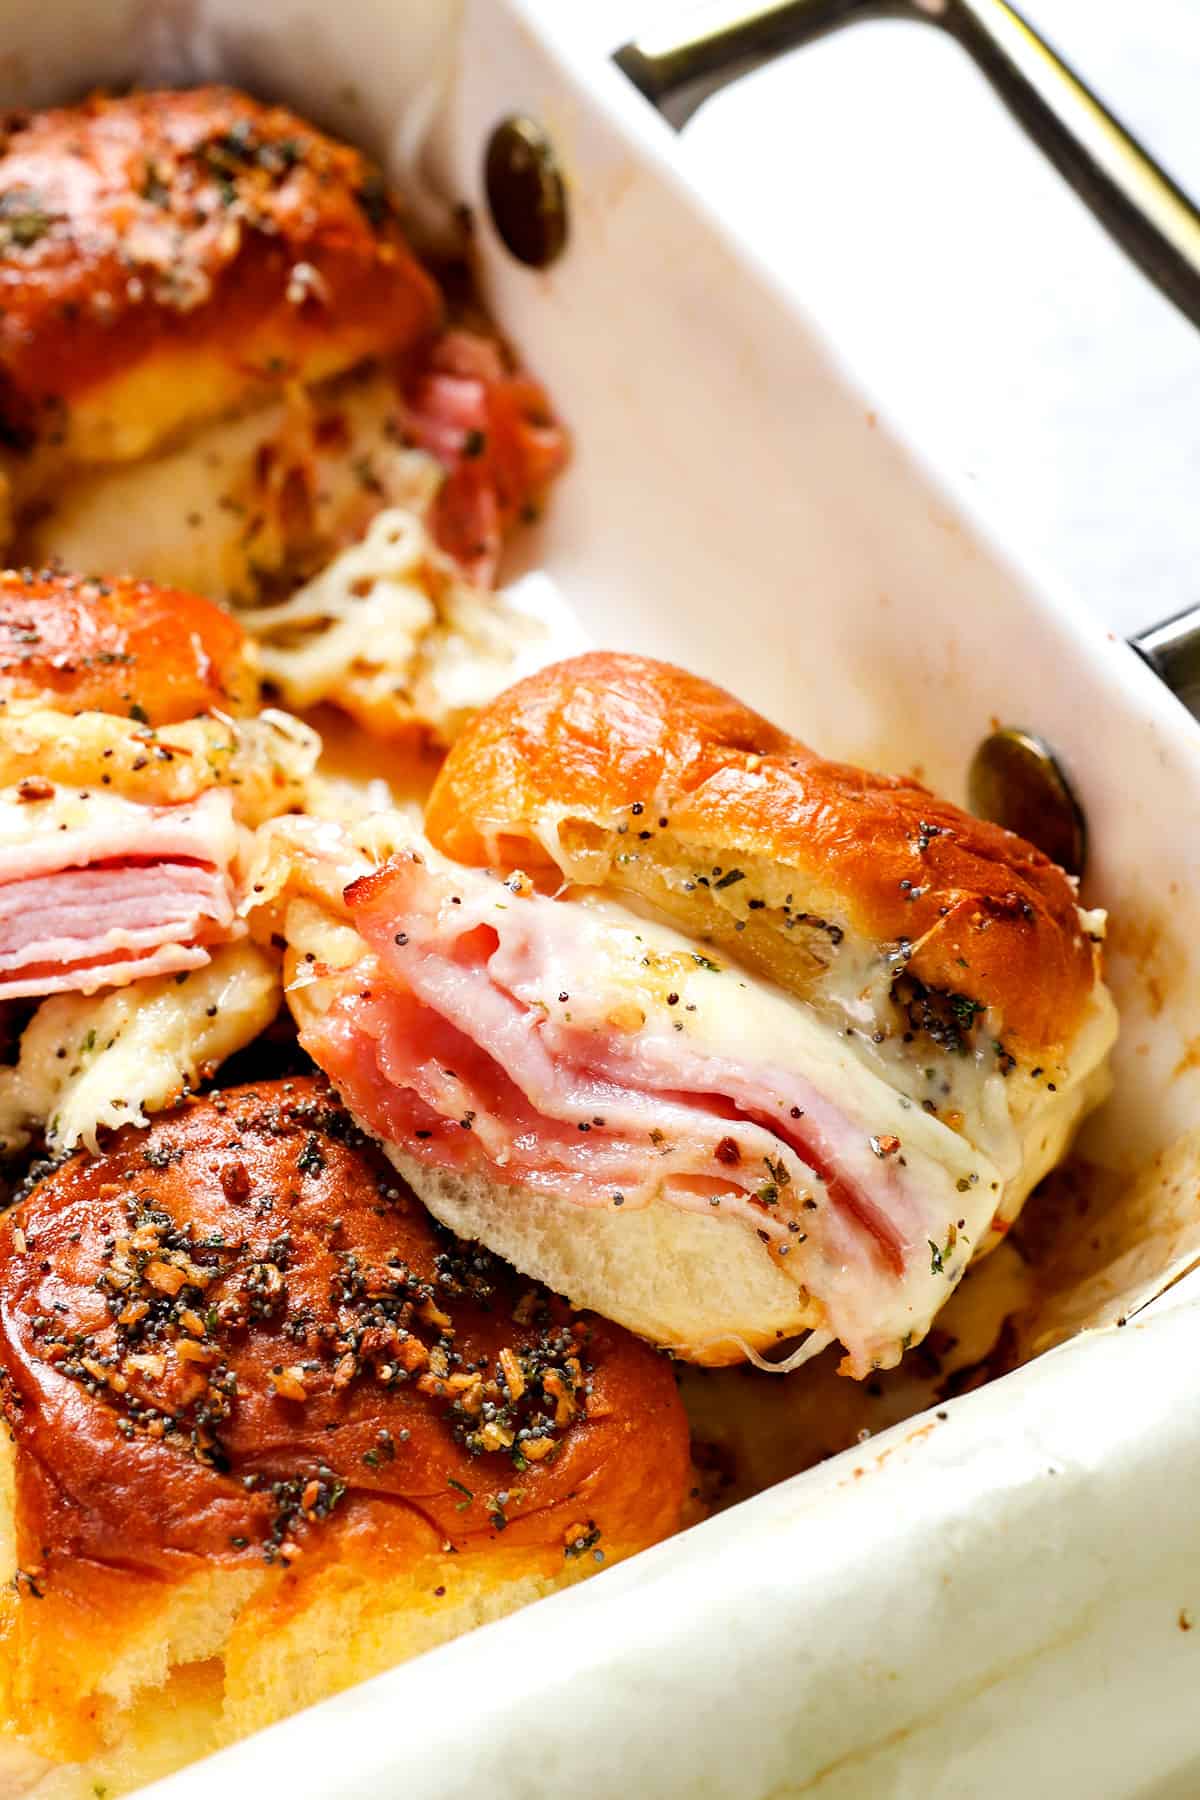 up close of hot ham and cheese sliders showing how cheesy they are